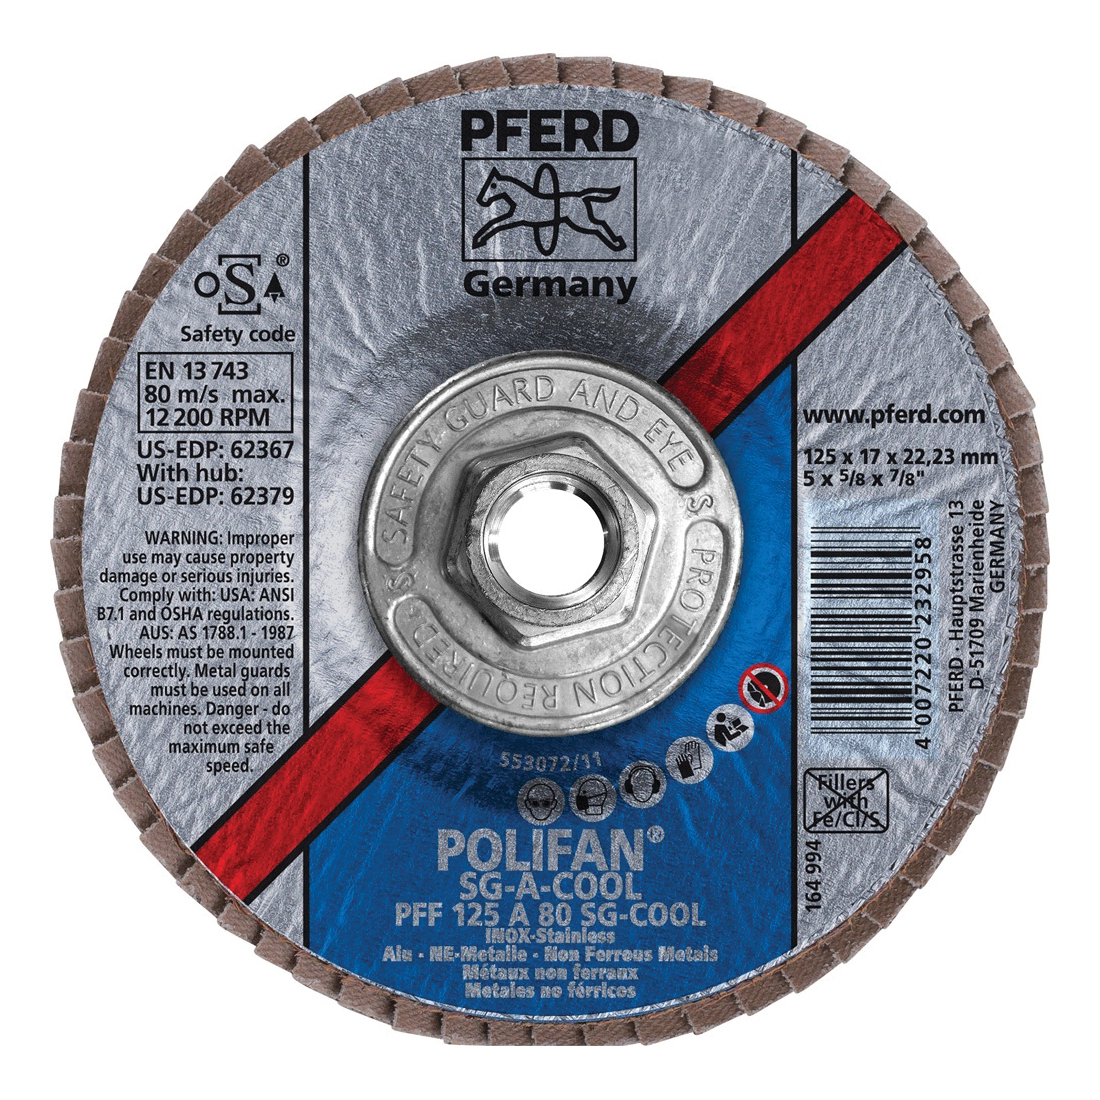 PFERD Polifan® 62379 Performance Line SG A-COOL Threaded Coated Abrasive Flap Disc, 5 in Dia, 80 Grit, Aluminum Oxide Abrasive, Type 27 Flat Disc